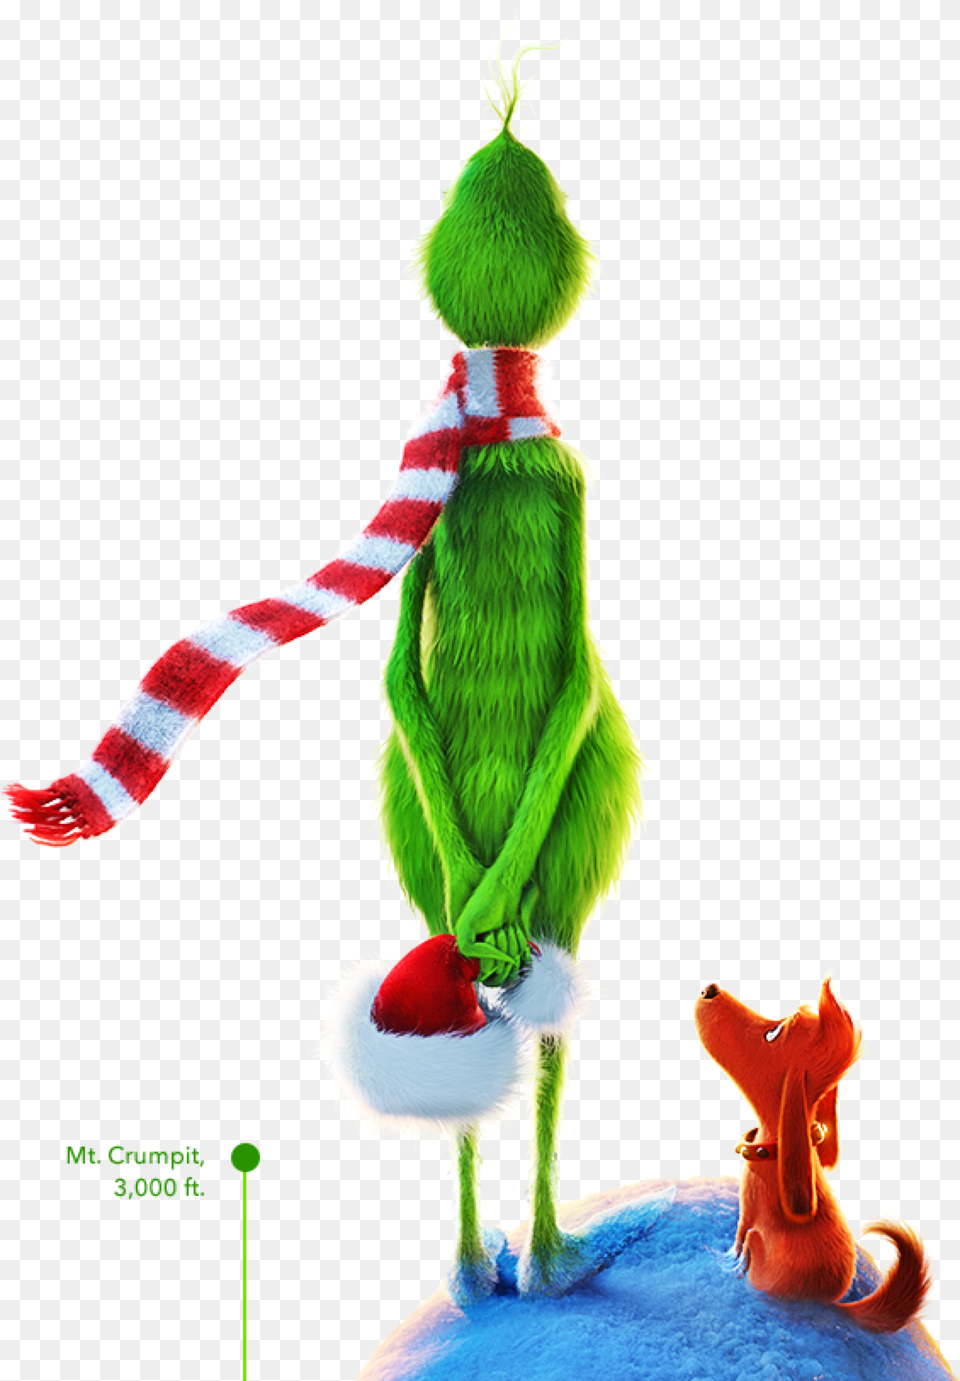 Max And The Grinch Scheming From Three Thousand Feet Figurine, Elf, Art Png